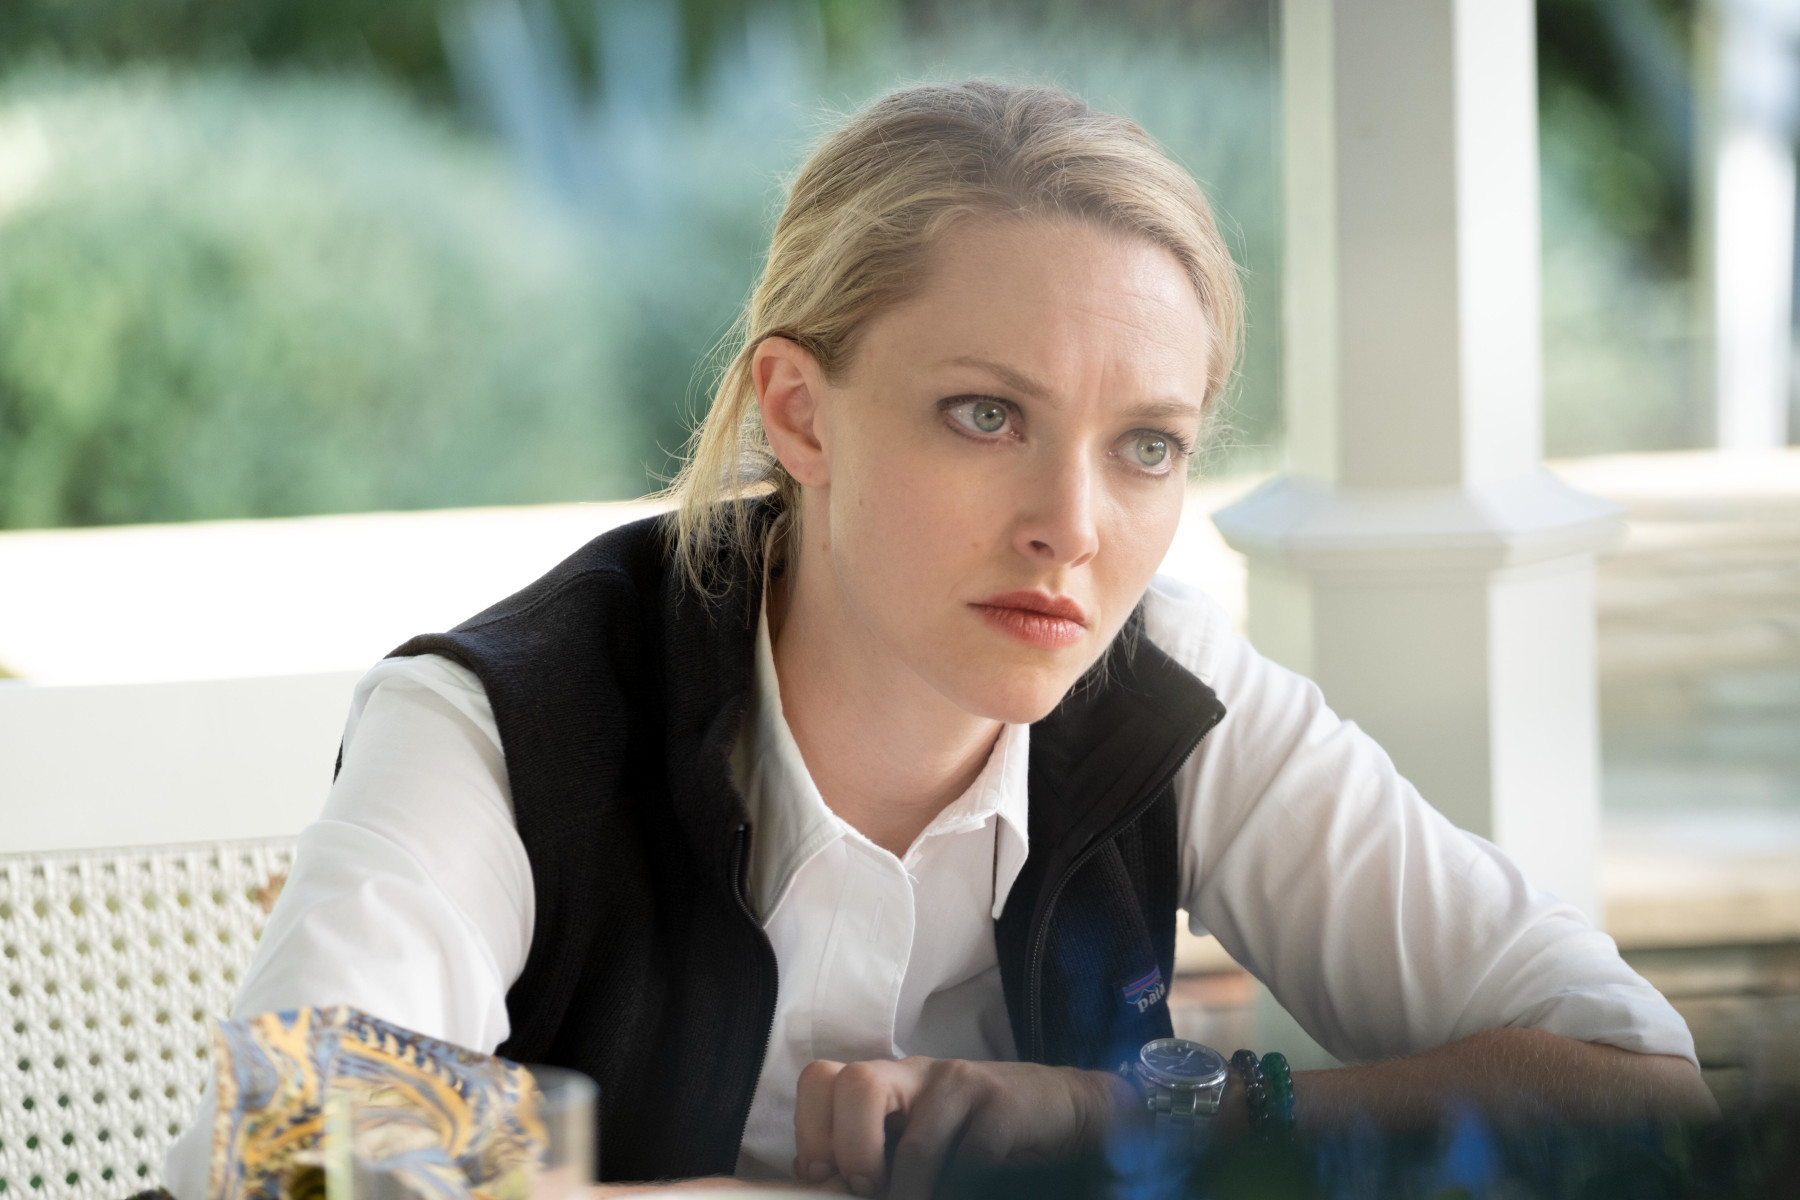 Amanda Seyfried in 'The Dropout' Episode 6 on Hulu. She's sitting at a table and leaning forward.